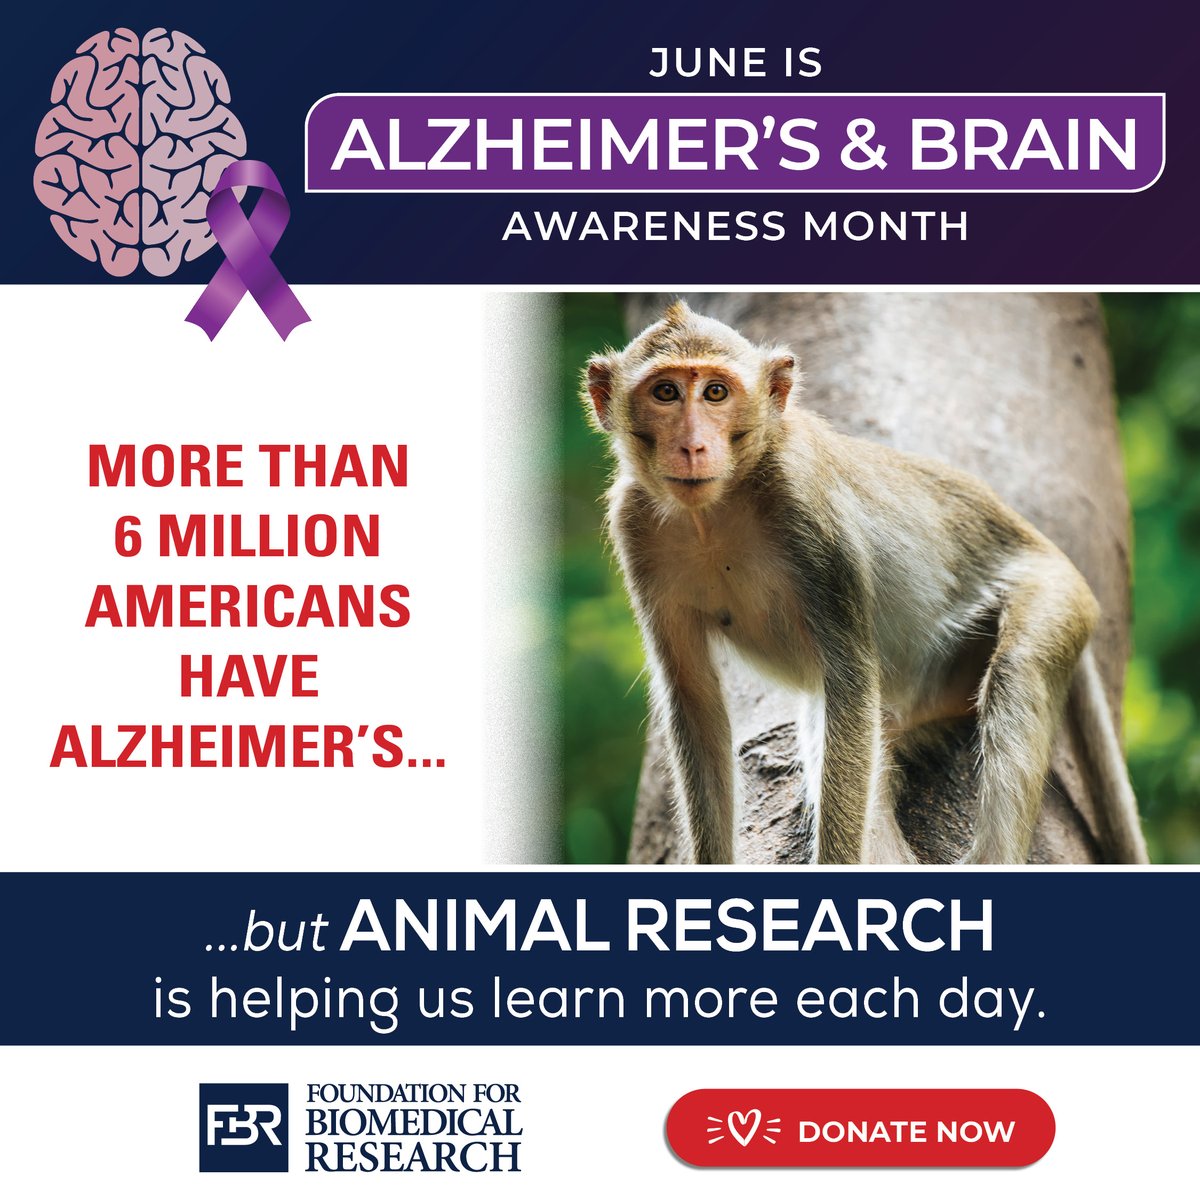 #AnimalResearch is helping scientists learn more about Alzheimer's and brain health thanks to important studies with animals including non-human primates.